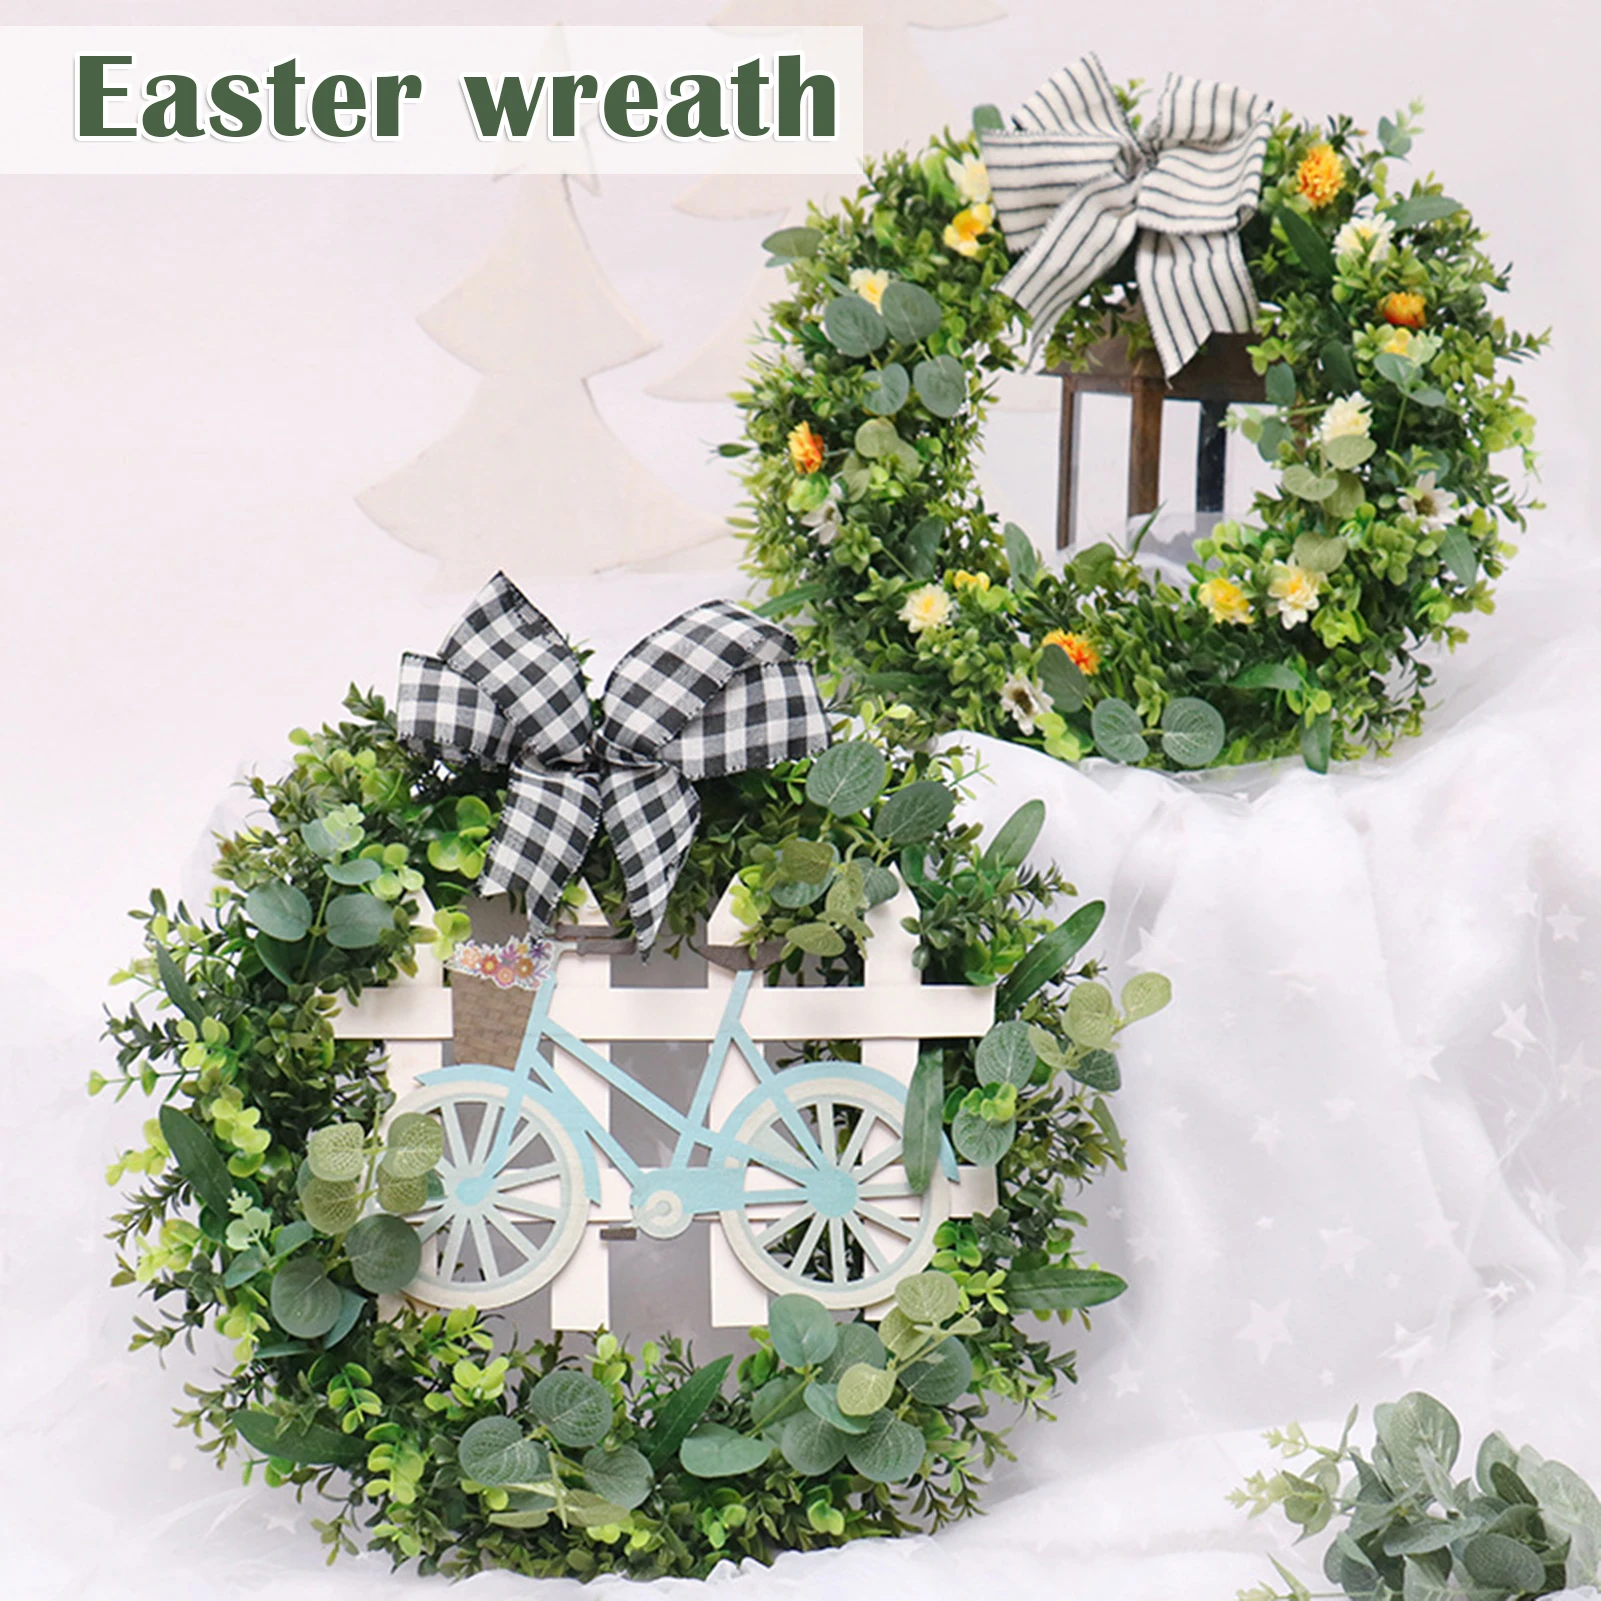 

48cm Plant Simulation Garland Pastoral Style Leaf Wreath Hanging Decoration for Wall Door Wedding Window FPing